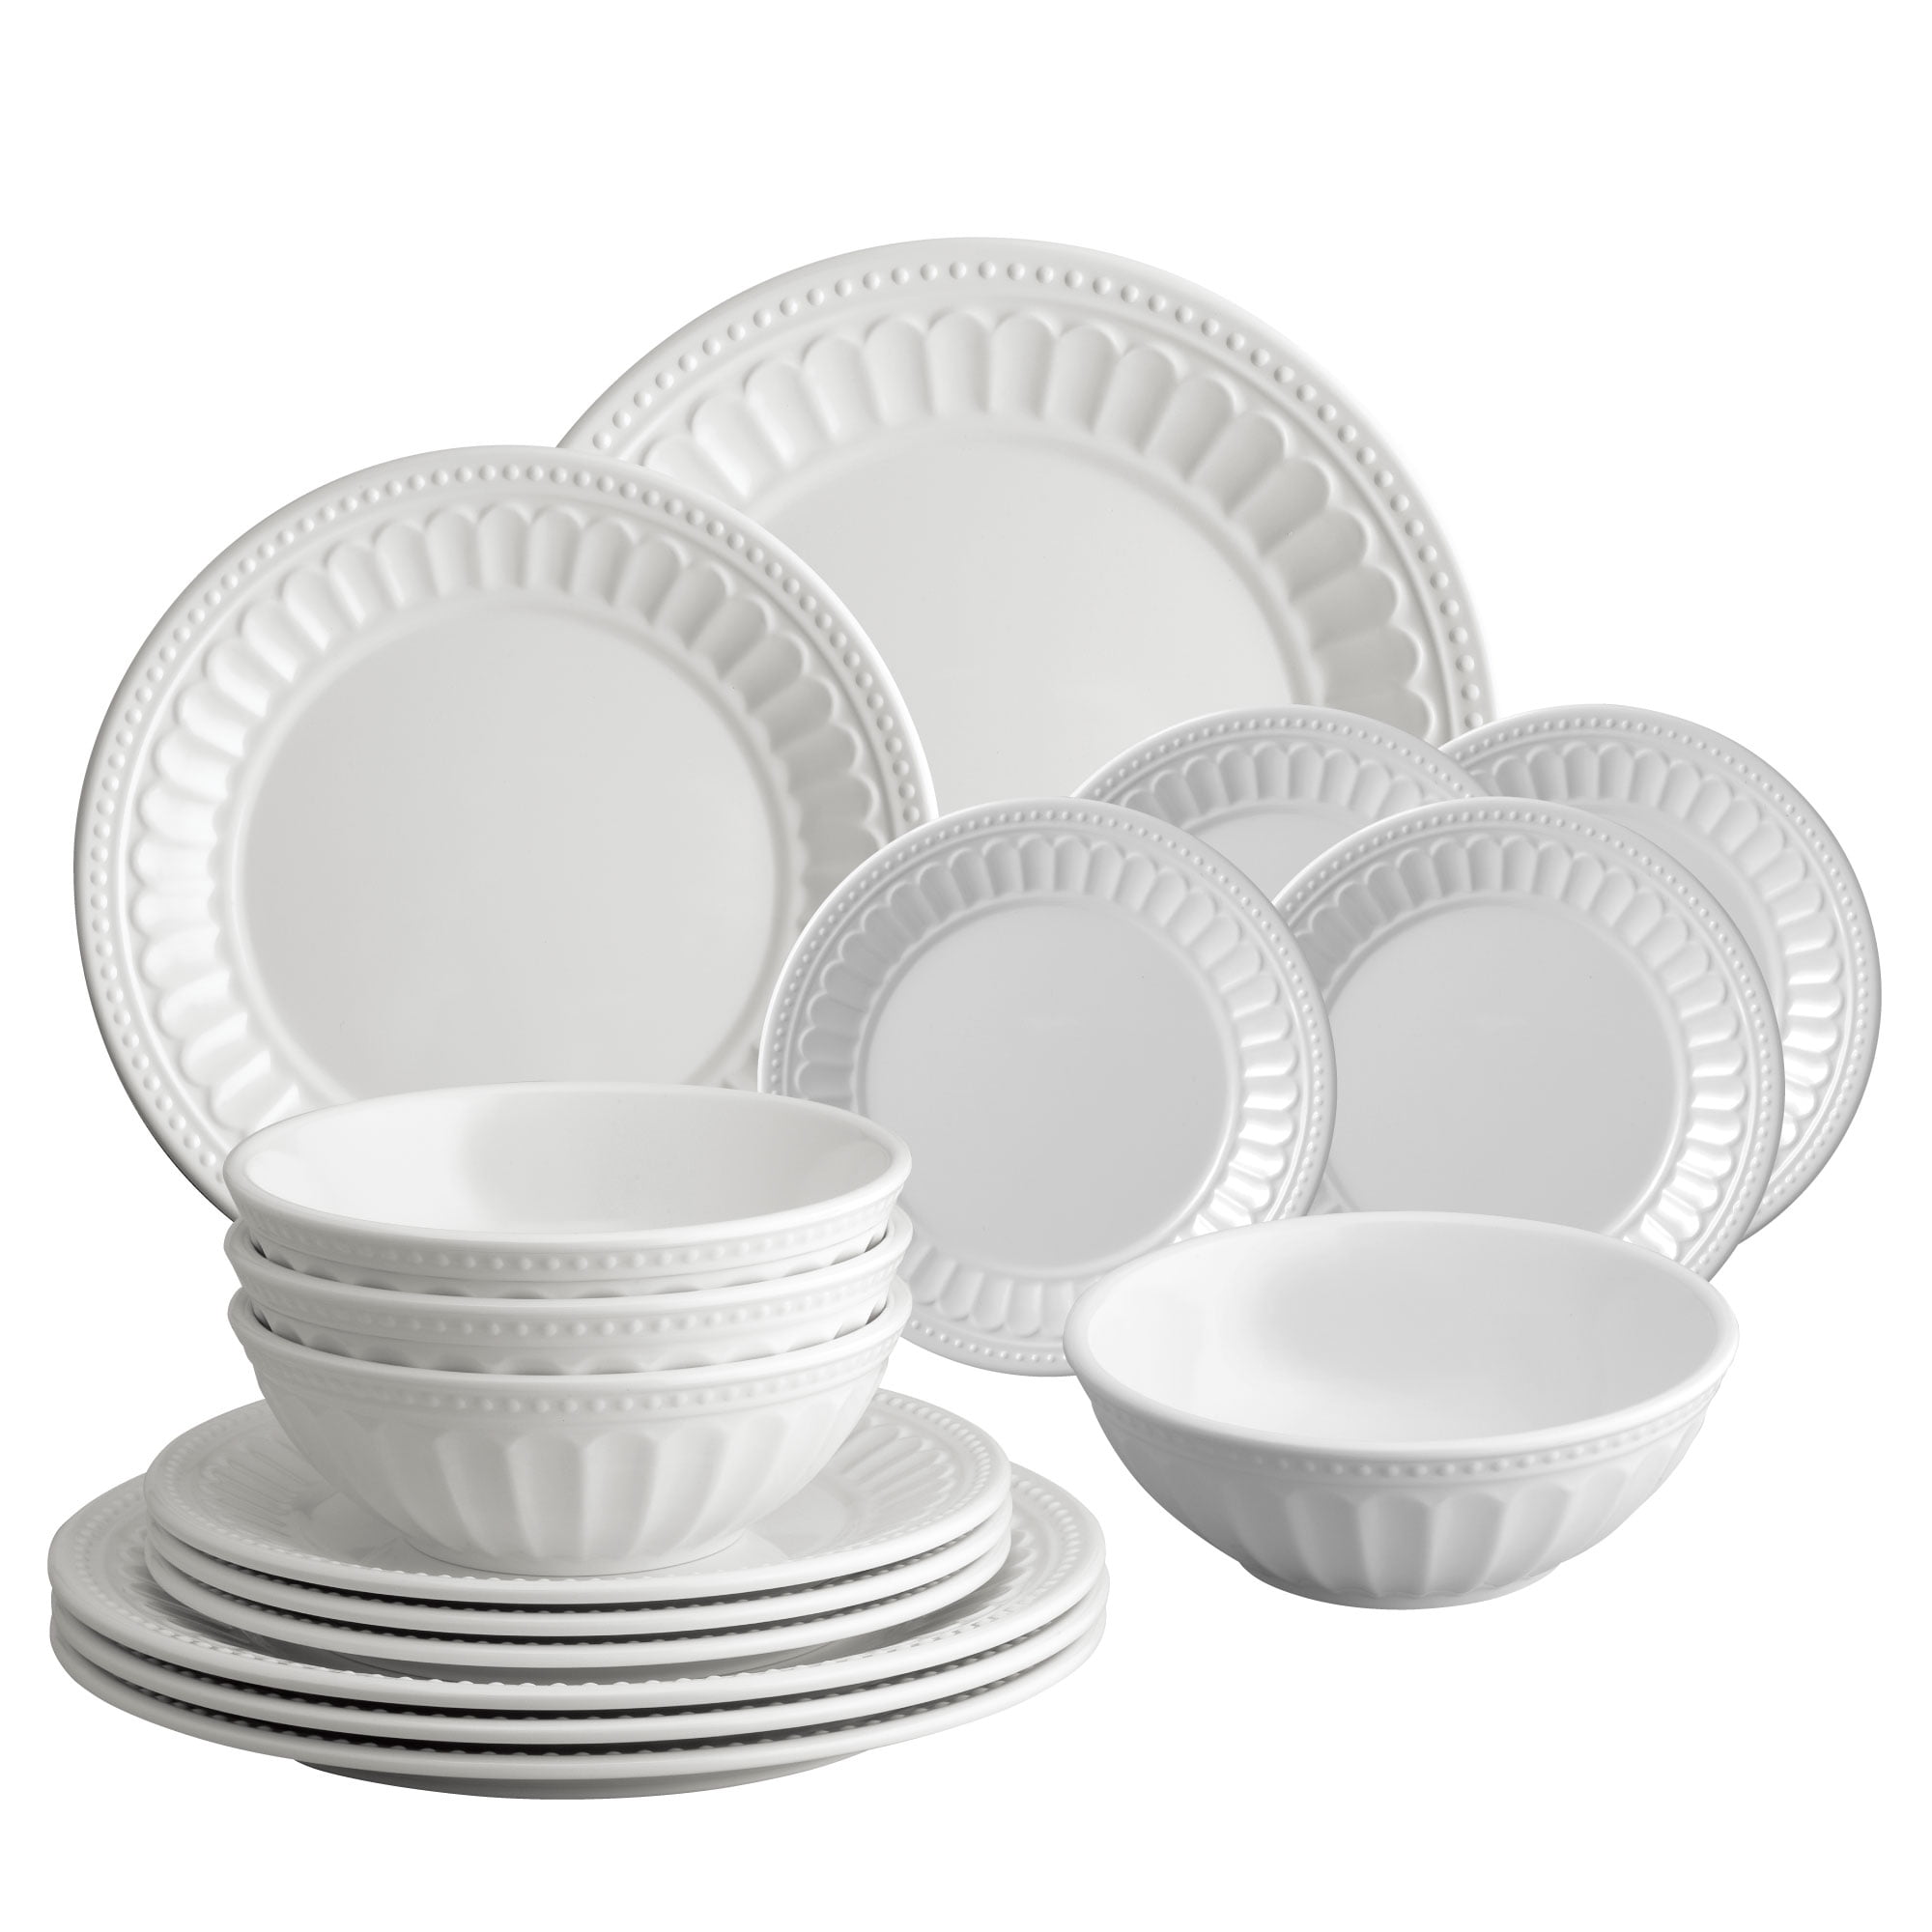 Dessert 2022 Includes Dinner Plates set for 4 16-Piece Beaded Chateau Heavyweight and Durable Melamine Dinnerware Set Salad Plates Sand